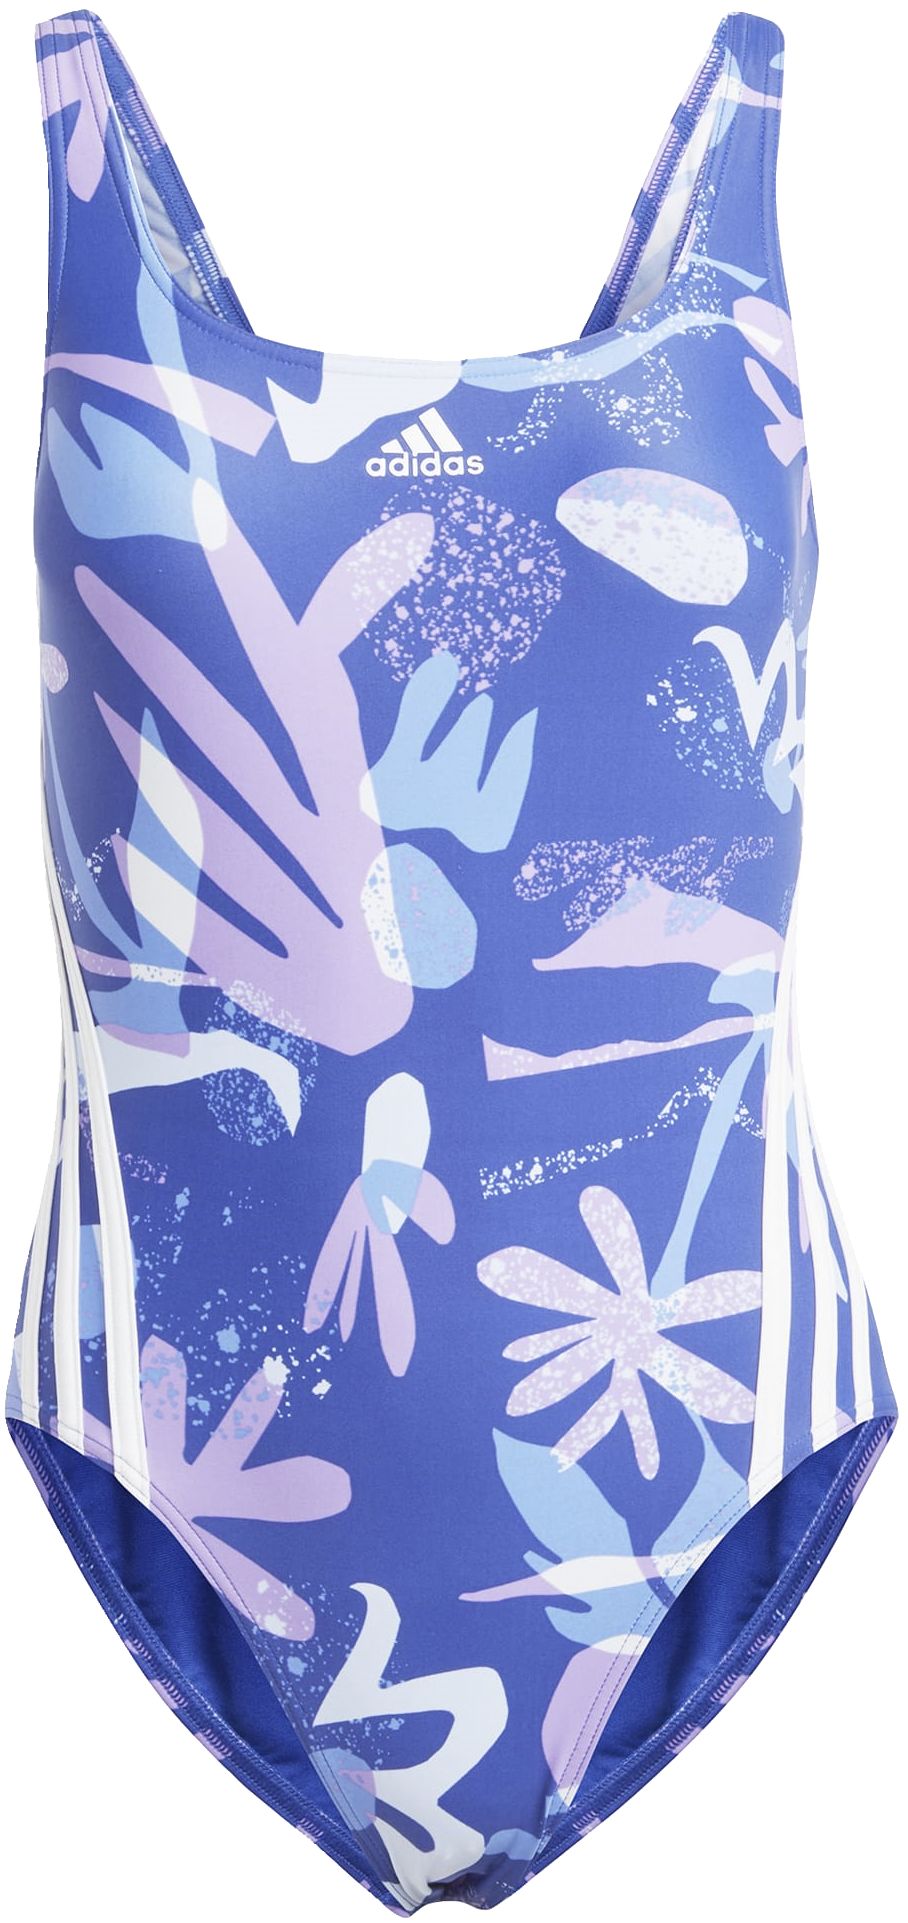 ADIDAS, Floral 3-Stripes Swimsuit